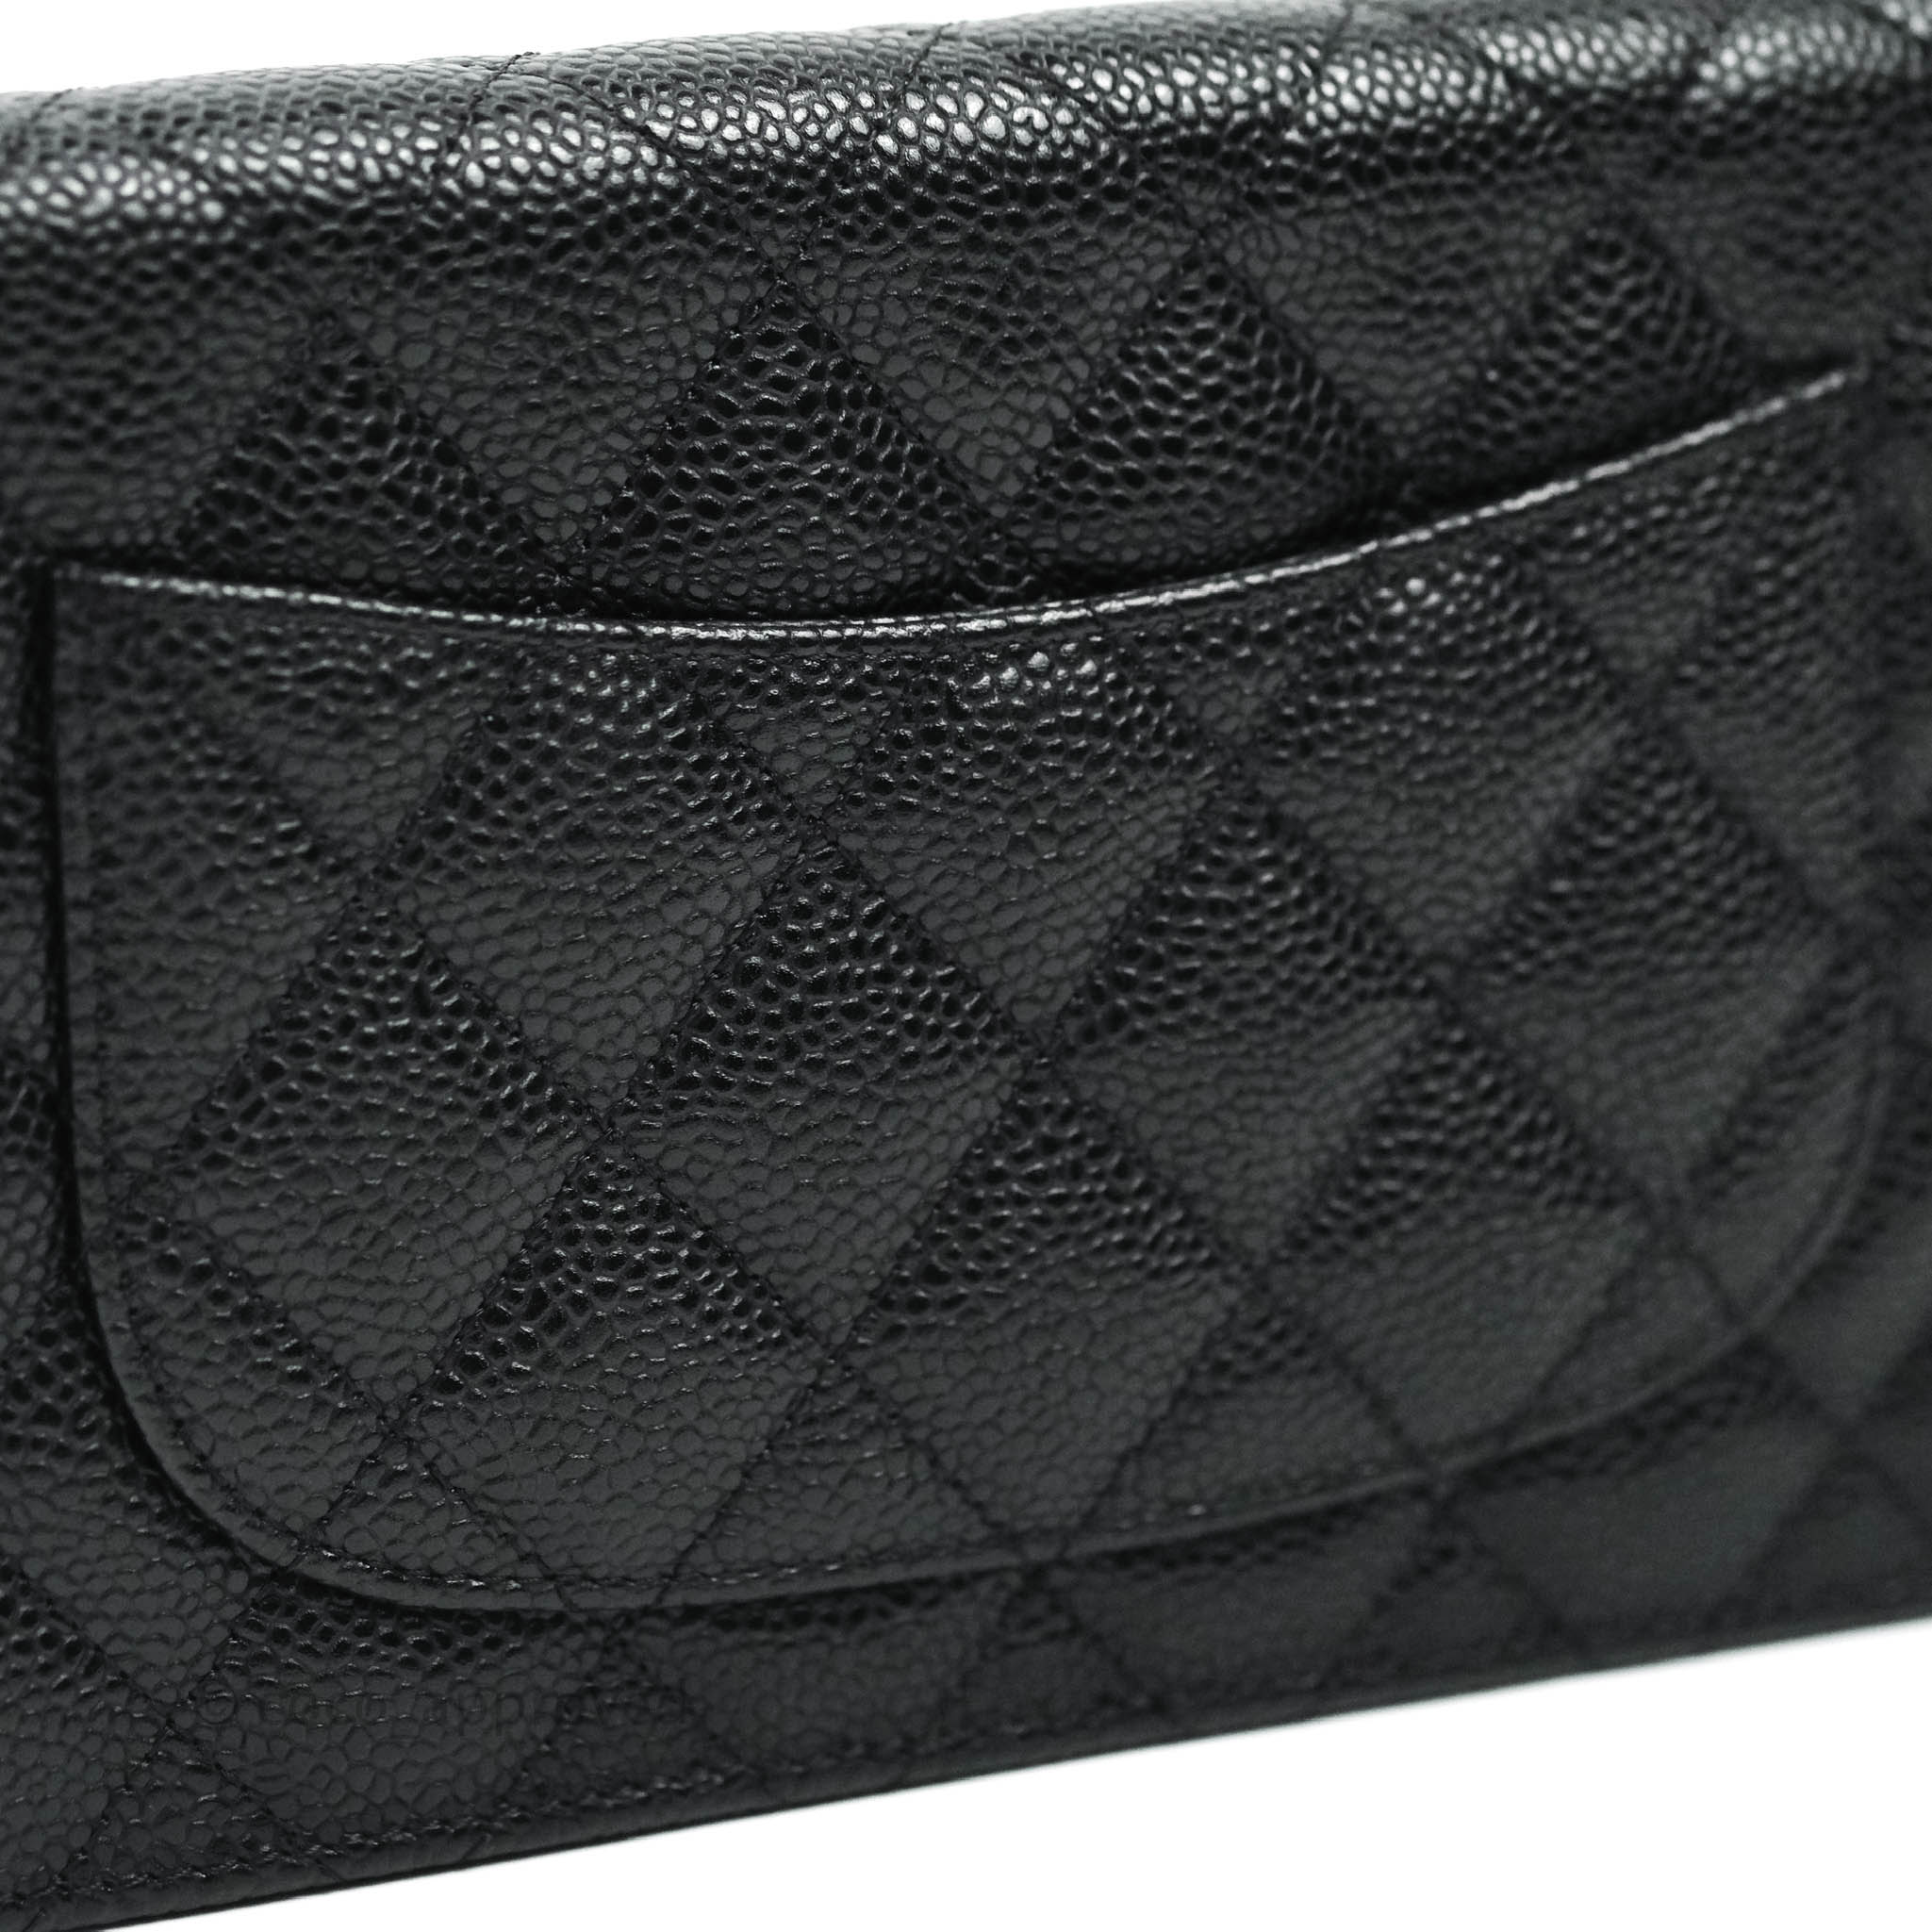 CHANEL, Bags, Brand New 222 Authentic Chanel Classic Black Caviar Quilted  Woc